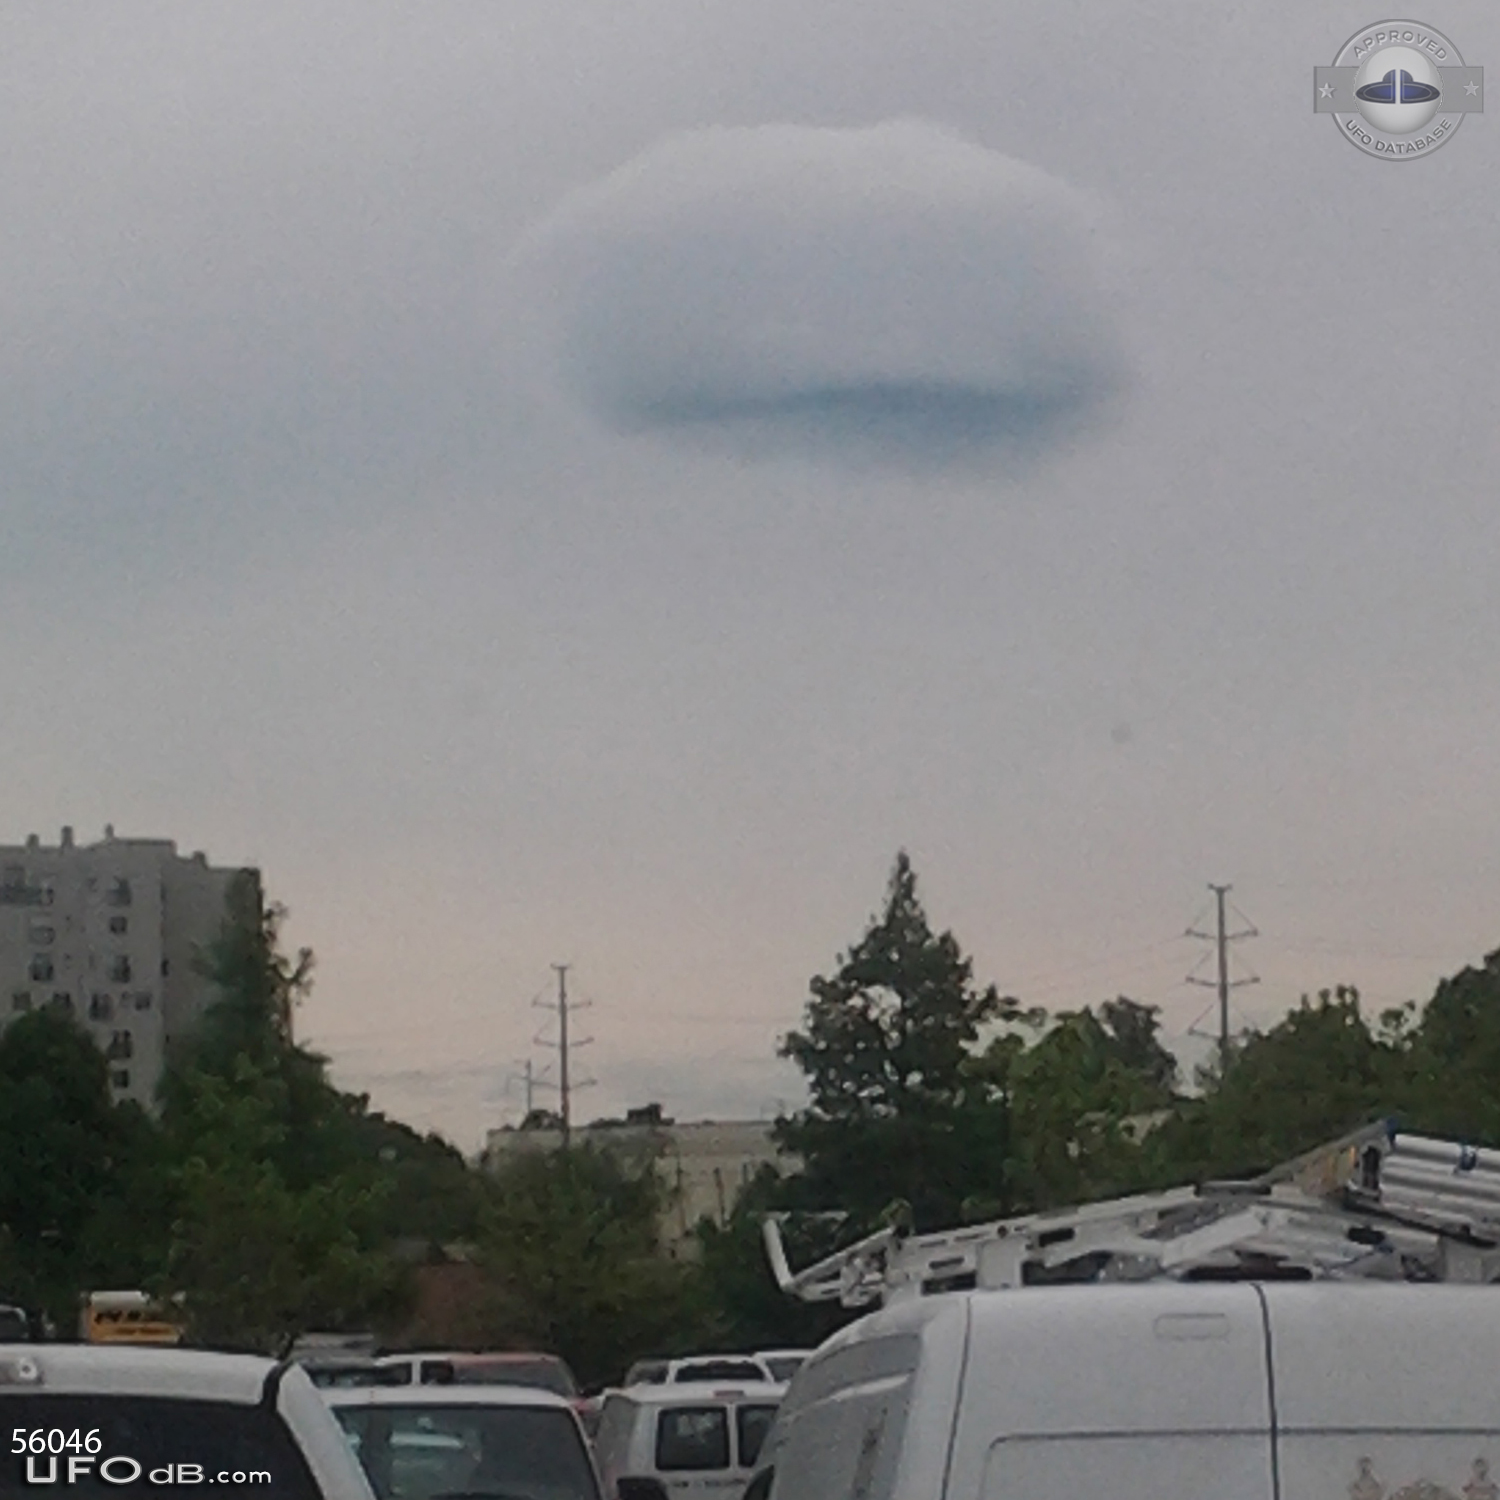 Cloud UFO over Atlanta reported to MUFON by 3 different witnesses 2014 UFO Picture #571-5